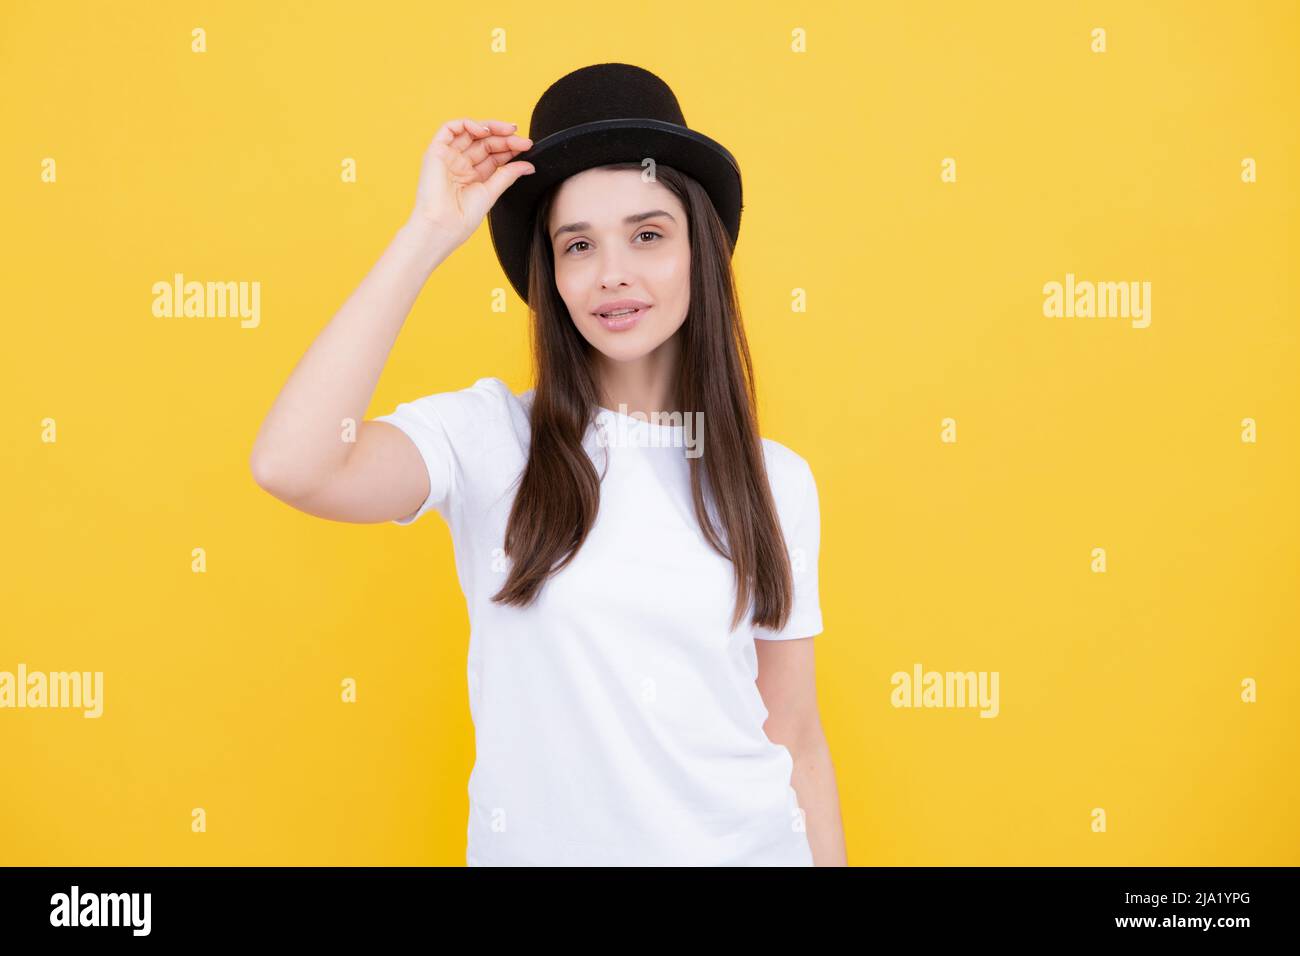 Woman in magician top hat, black vintage cylinder cap on yellow background. Girl circus performer with headwear for magic tricks. Stock Photo